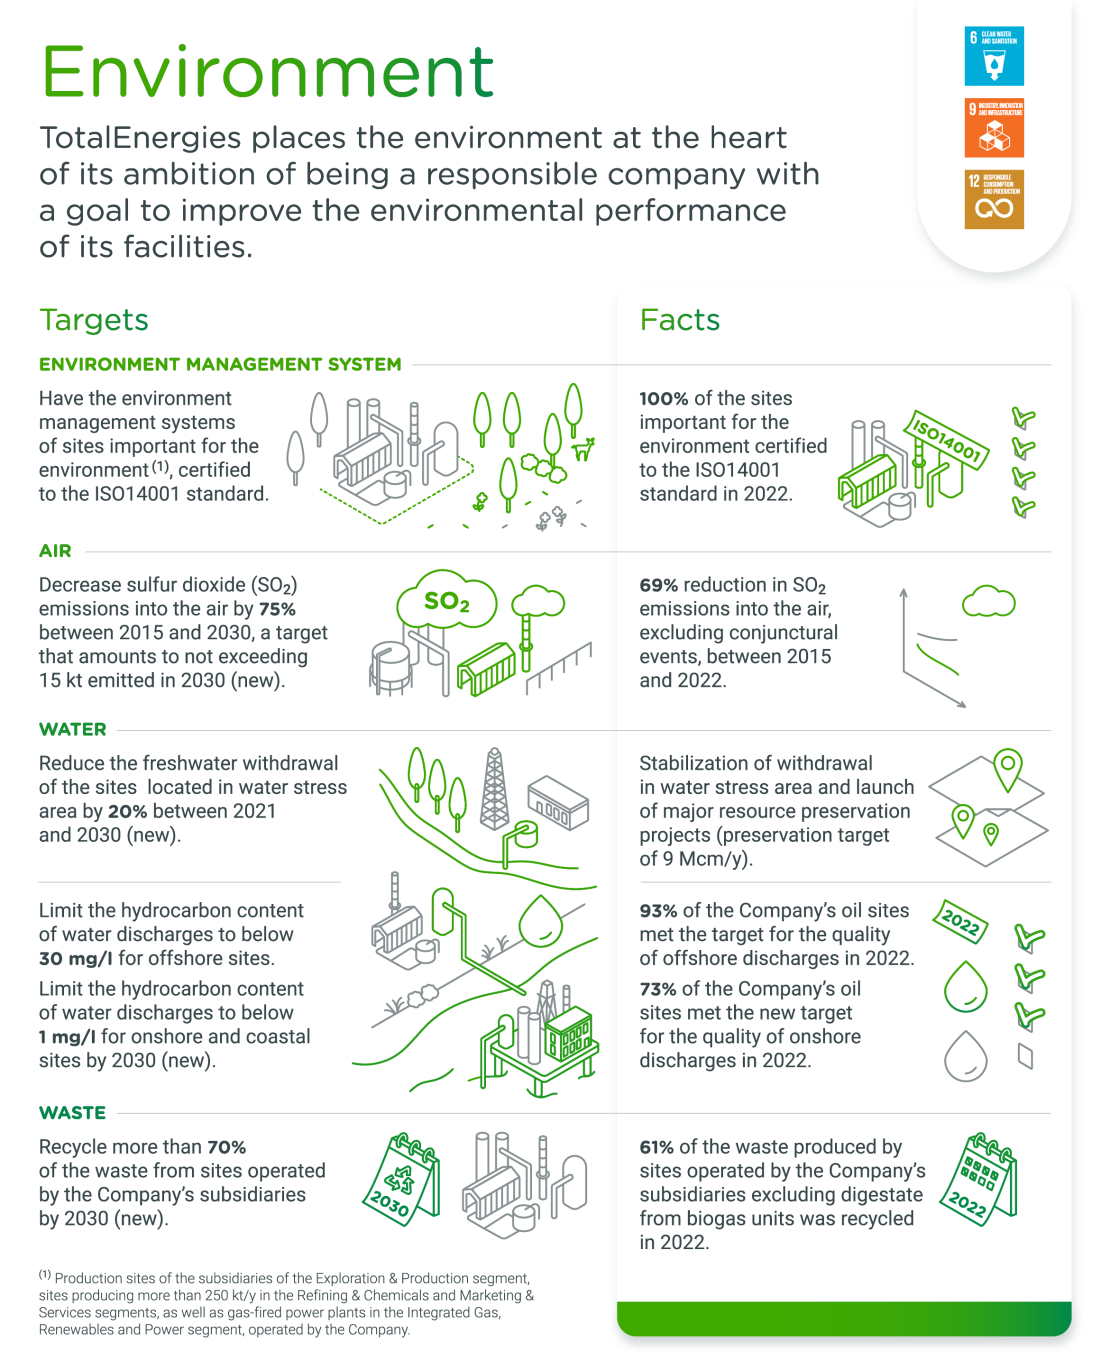 Infographics "Targets environment" - see detailed description hereafter